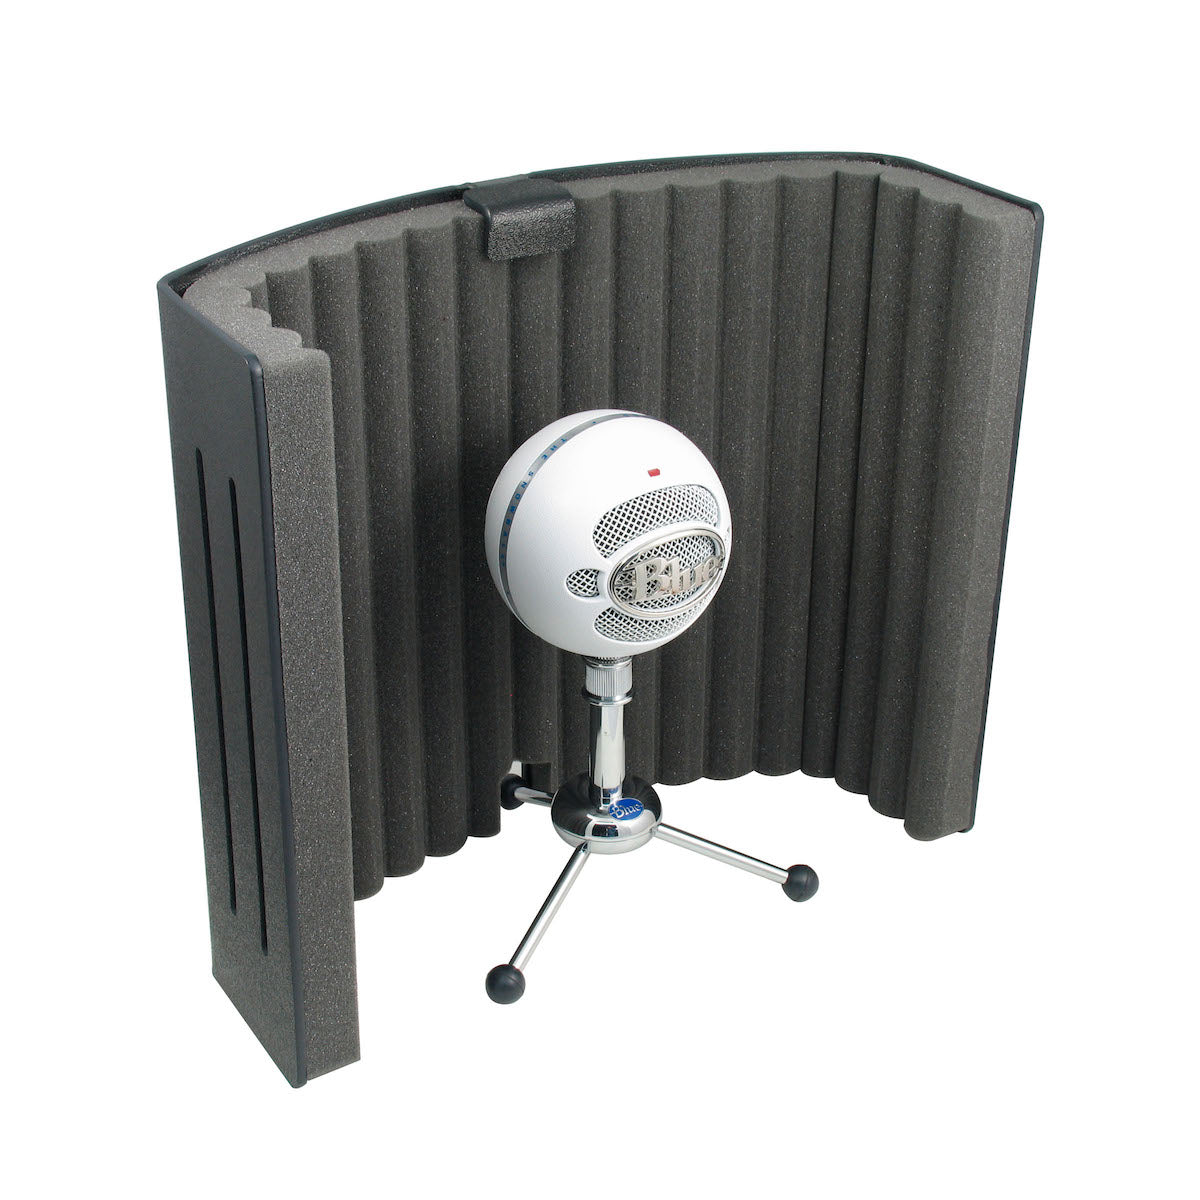 Primacoustic VoxGuard VU - Nearfield Absorber Mic Shield, shown with microphone not included